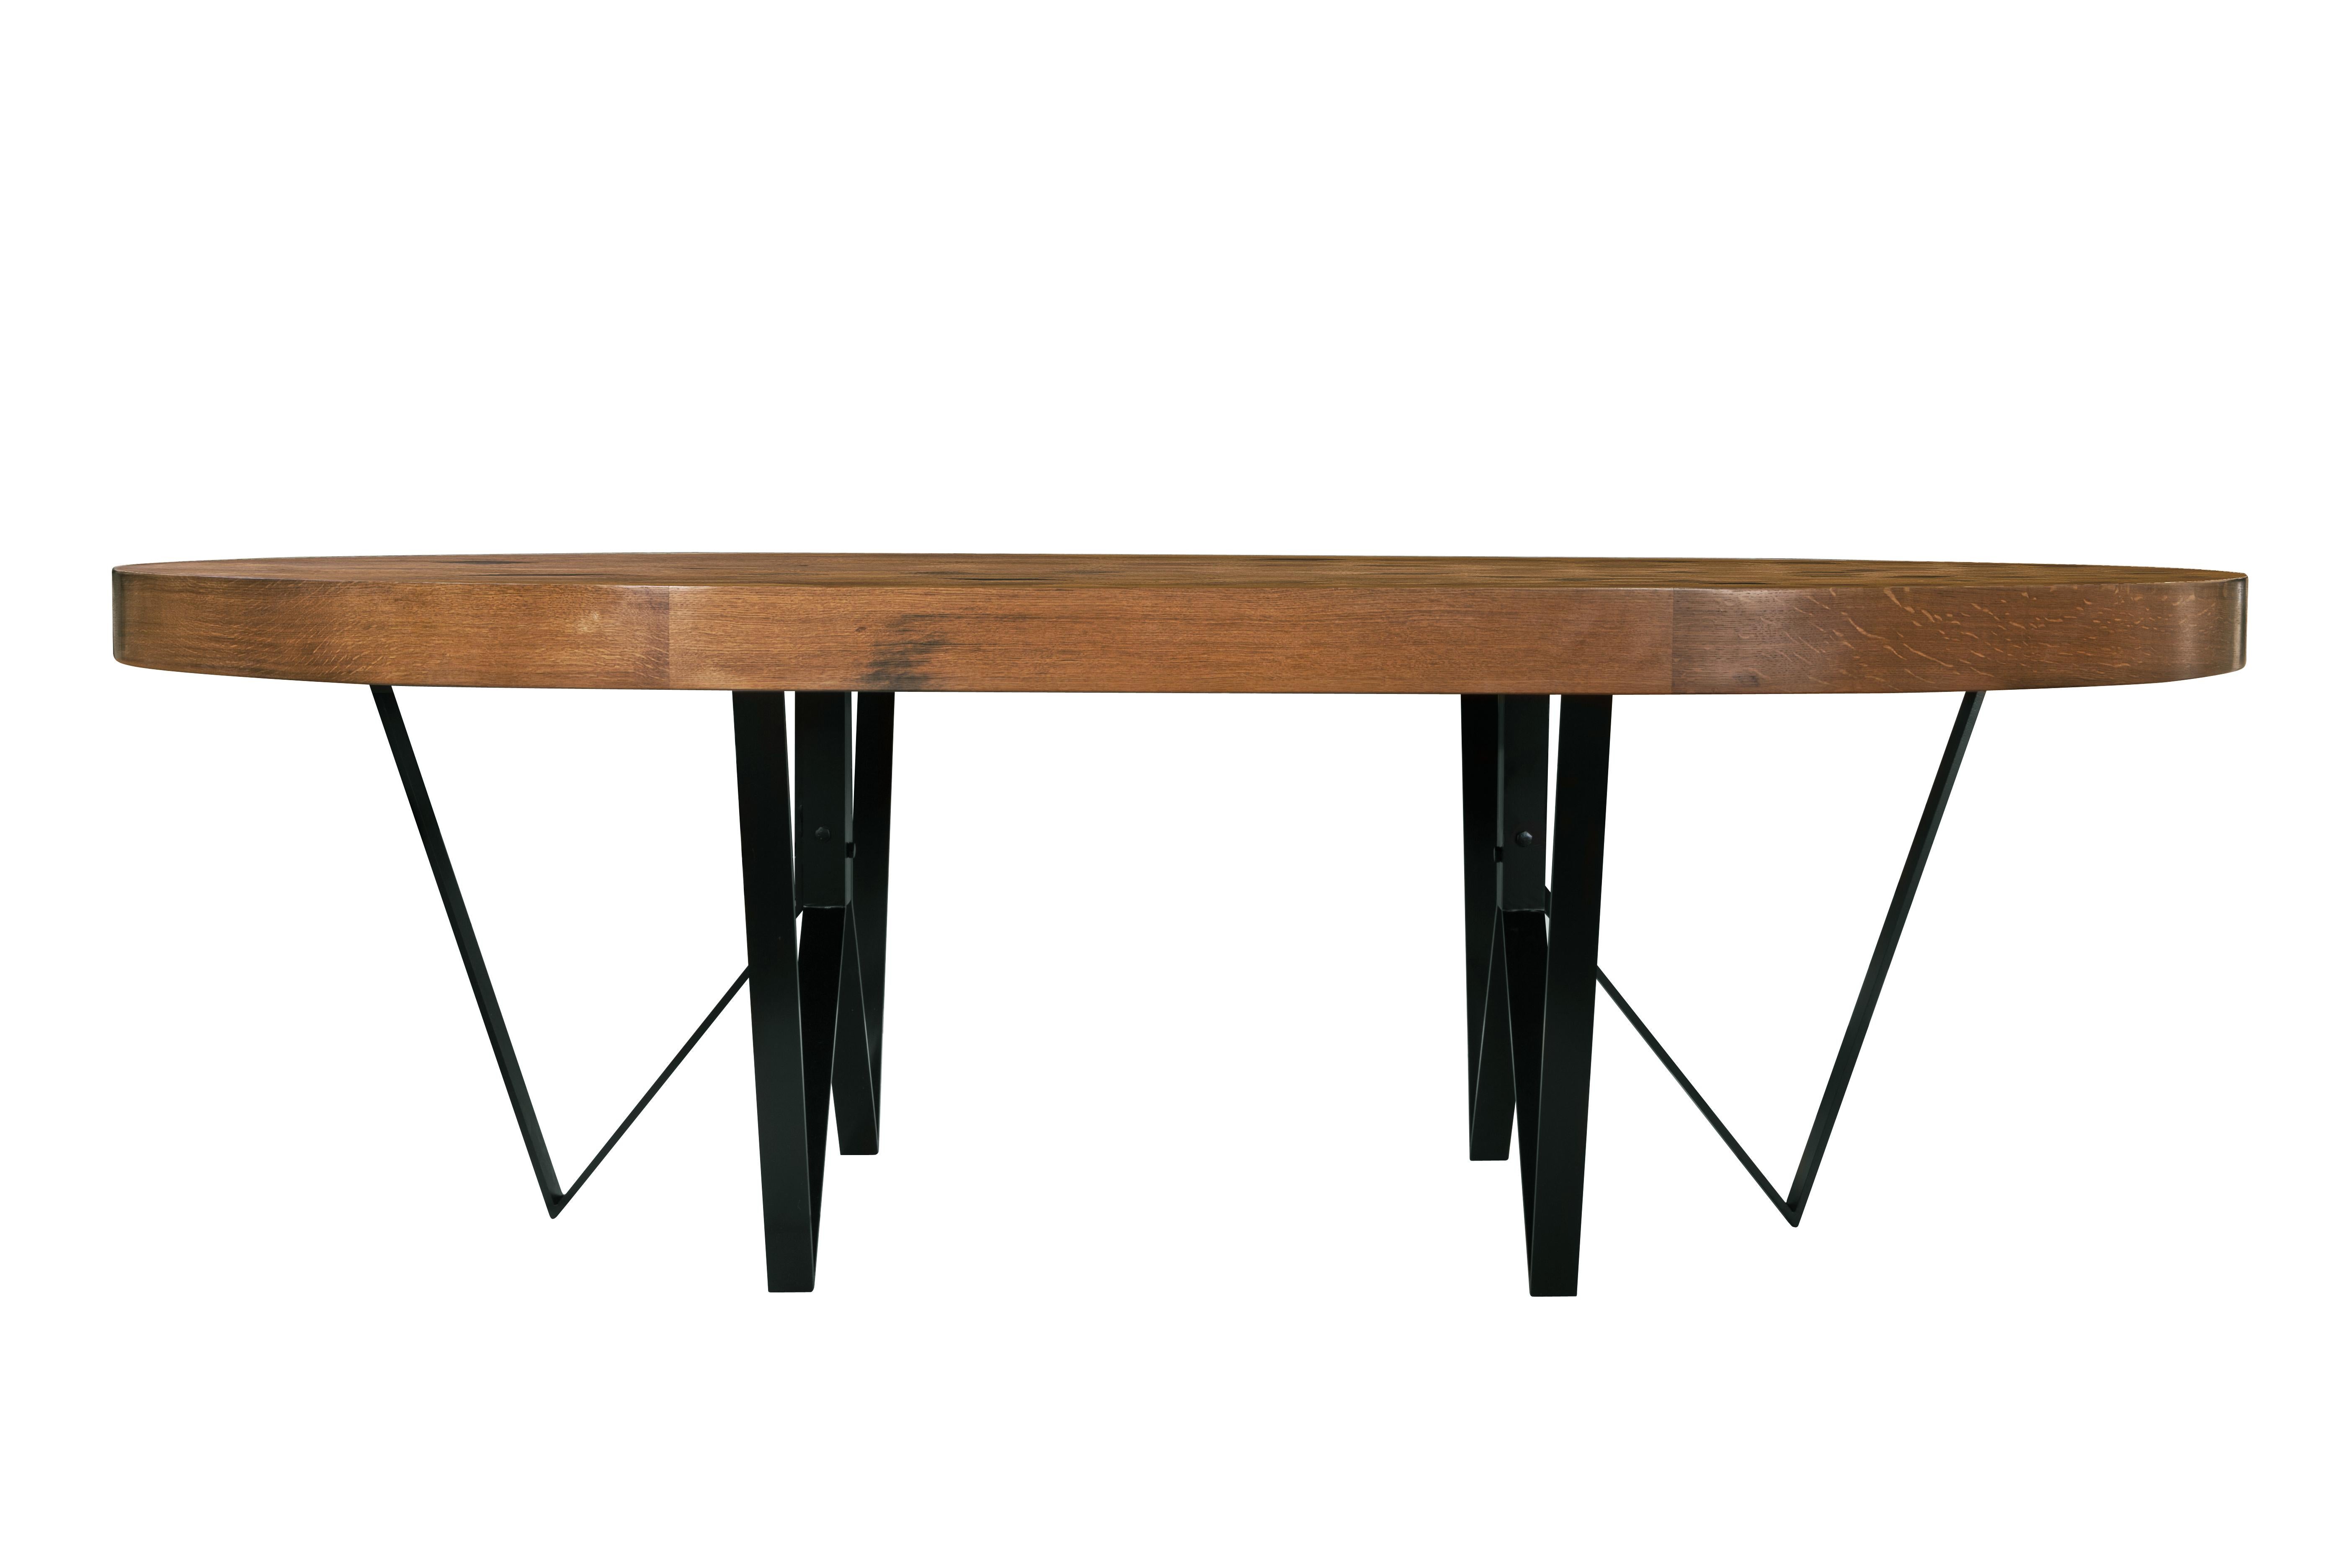 Maurits Reclaimed Oak Oval Dining Table by Fred and Juul
Dimensions: D 160 x W 295 x H 78 cm.
Materials: Reclaimed oak and black metal.

Available in round or stadium shape. Also available in different materials. Custom sizes, materials or finishes